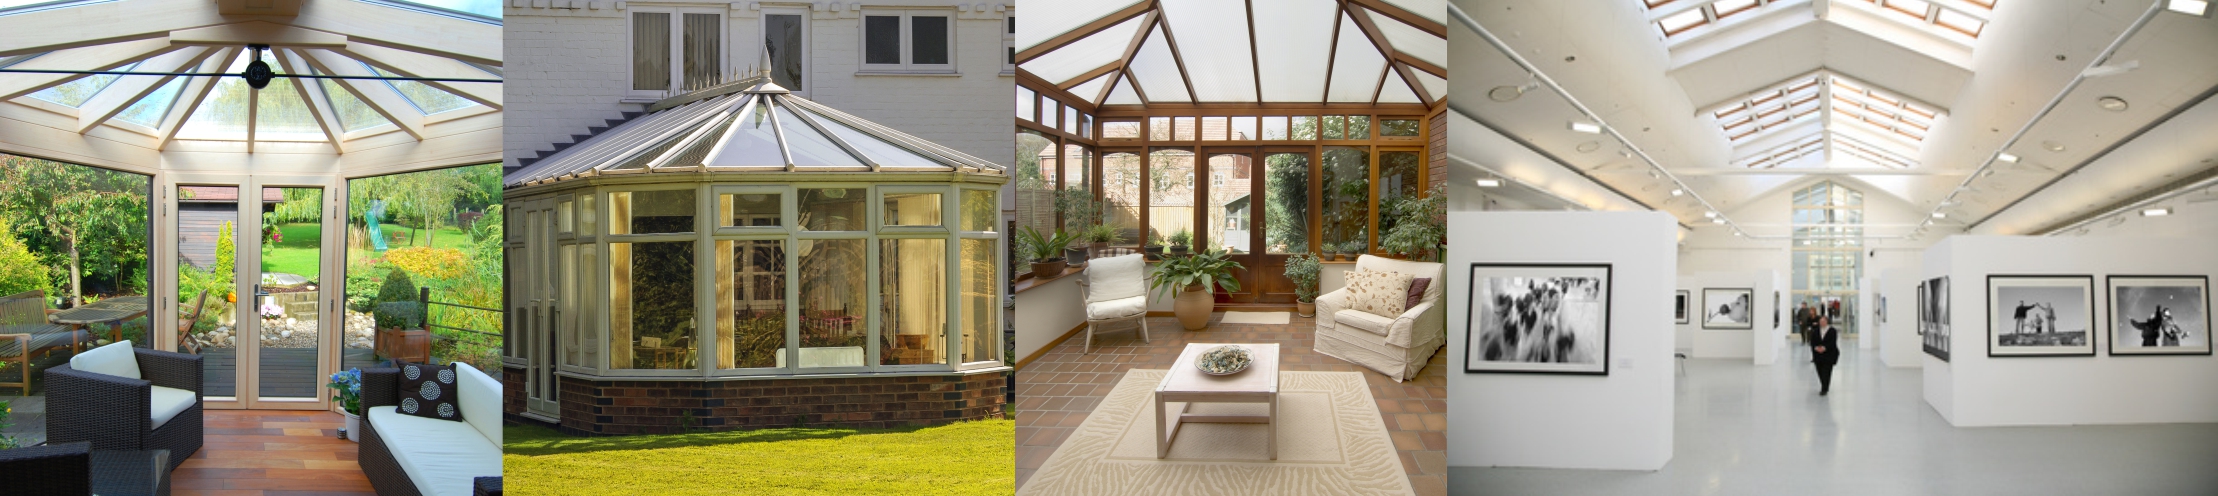 Conservatory Window Film by Purlfrost